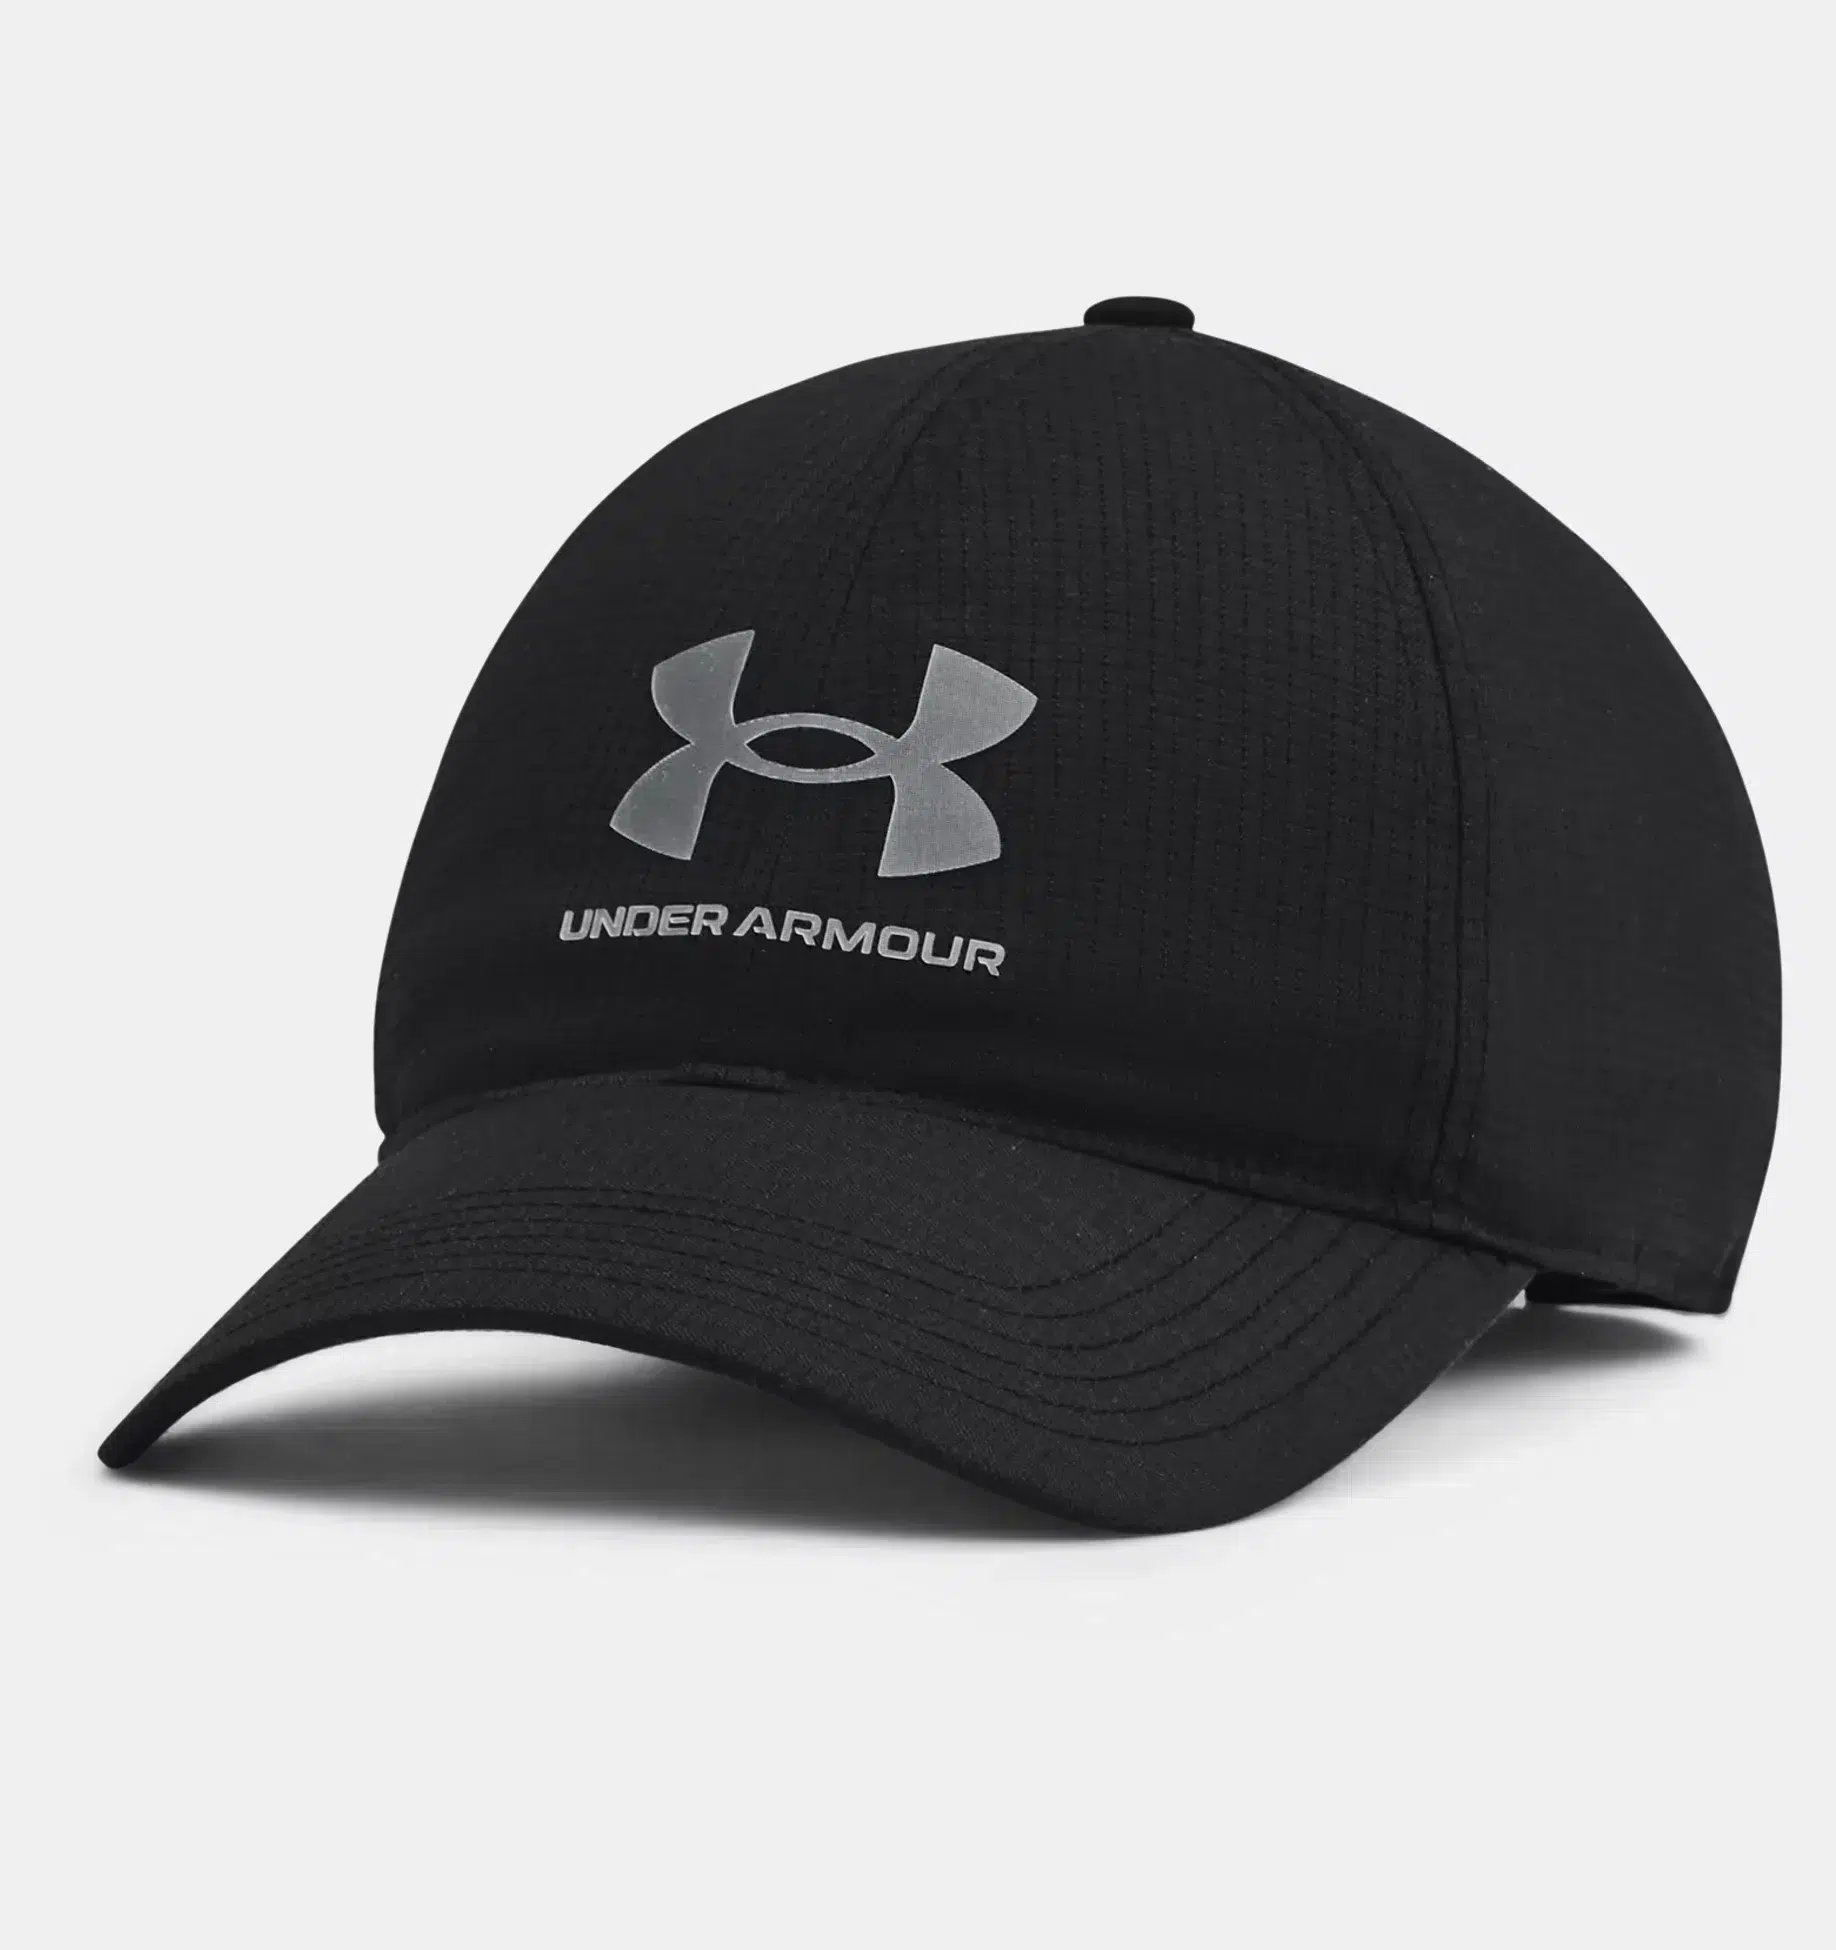 Under Armour - Iso-Chill ArmourVent Adjustable Hat - Black thumbnail